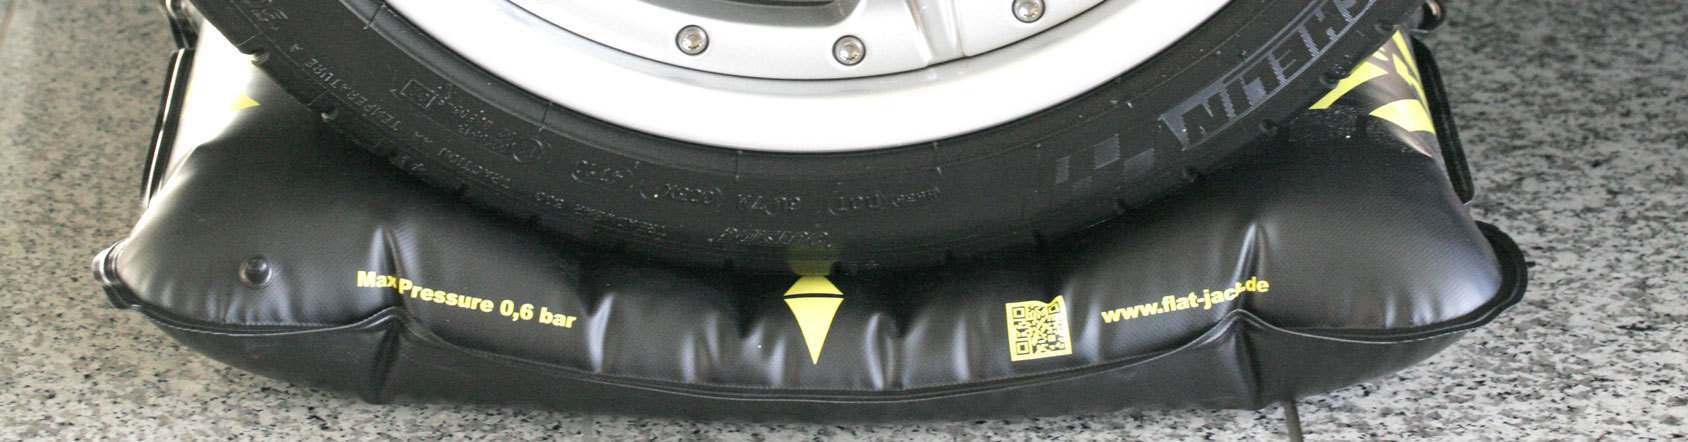 Prevent Tyre/Tire Flat Spots with the Reifenkissen Tyre Cushion 